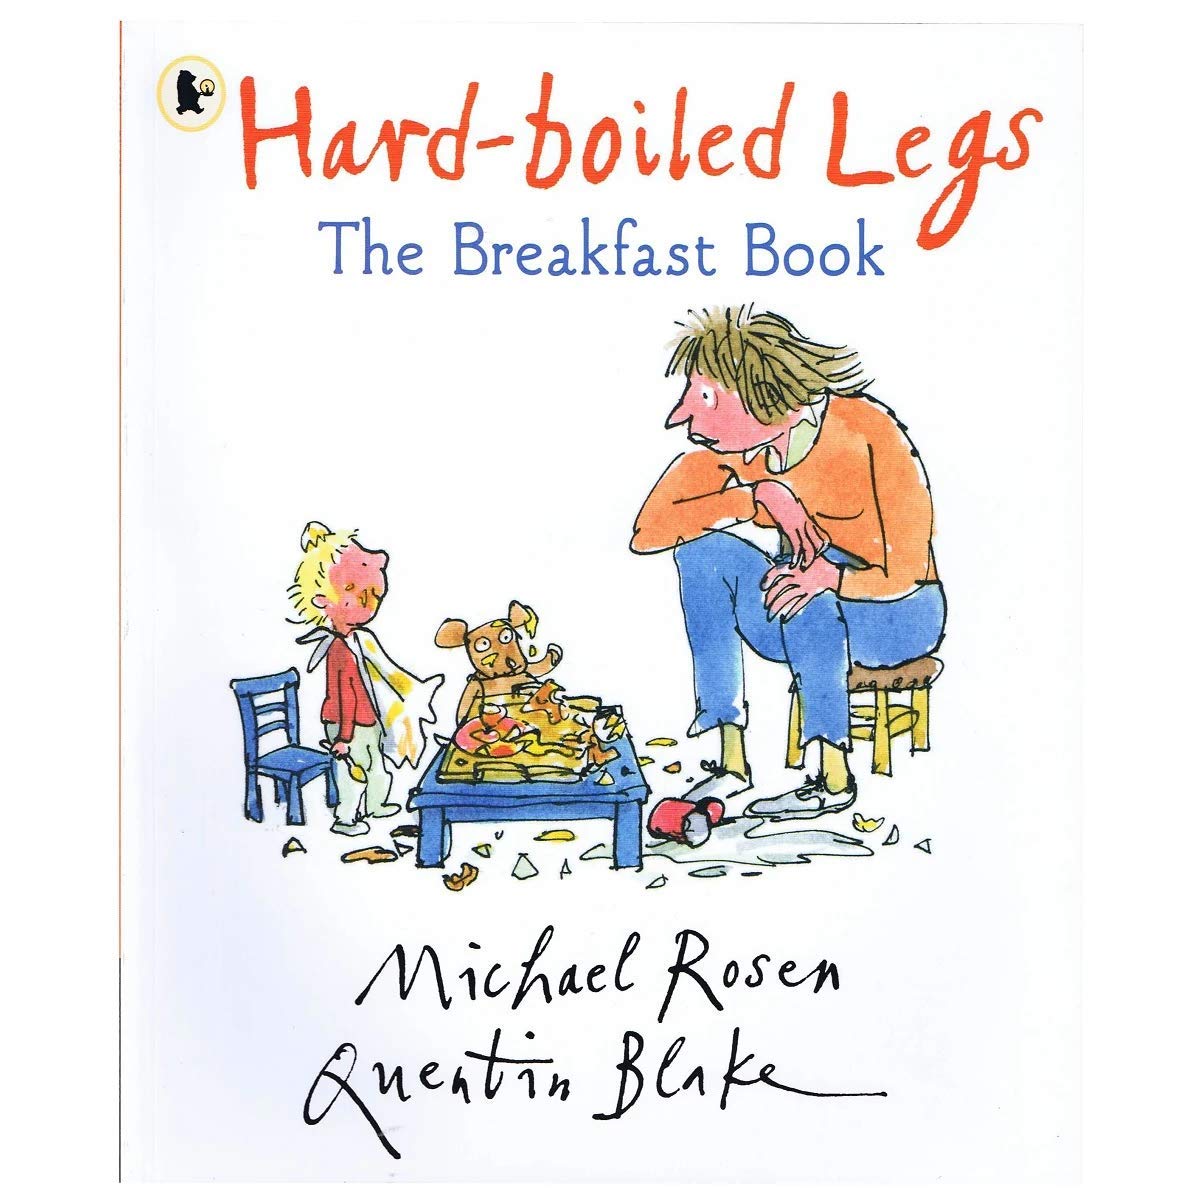 Hard Boiled Legs, The Breakfast Book by Michael Rosen and Quentin Blake